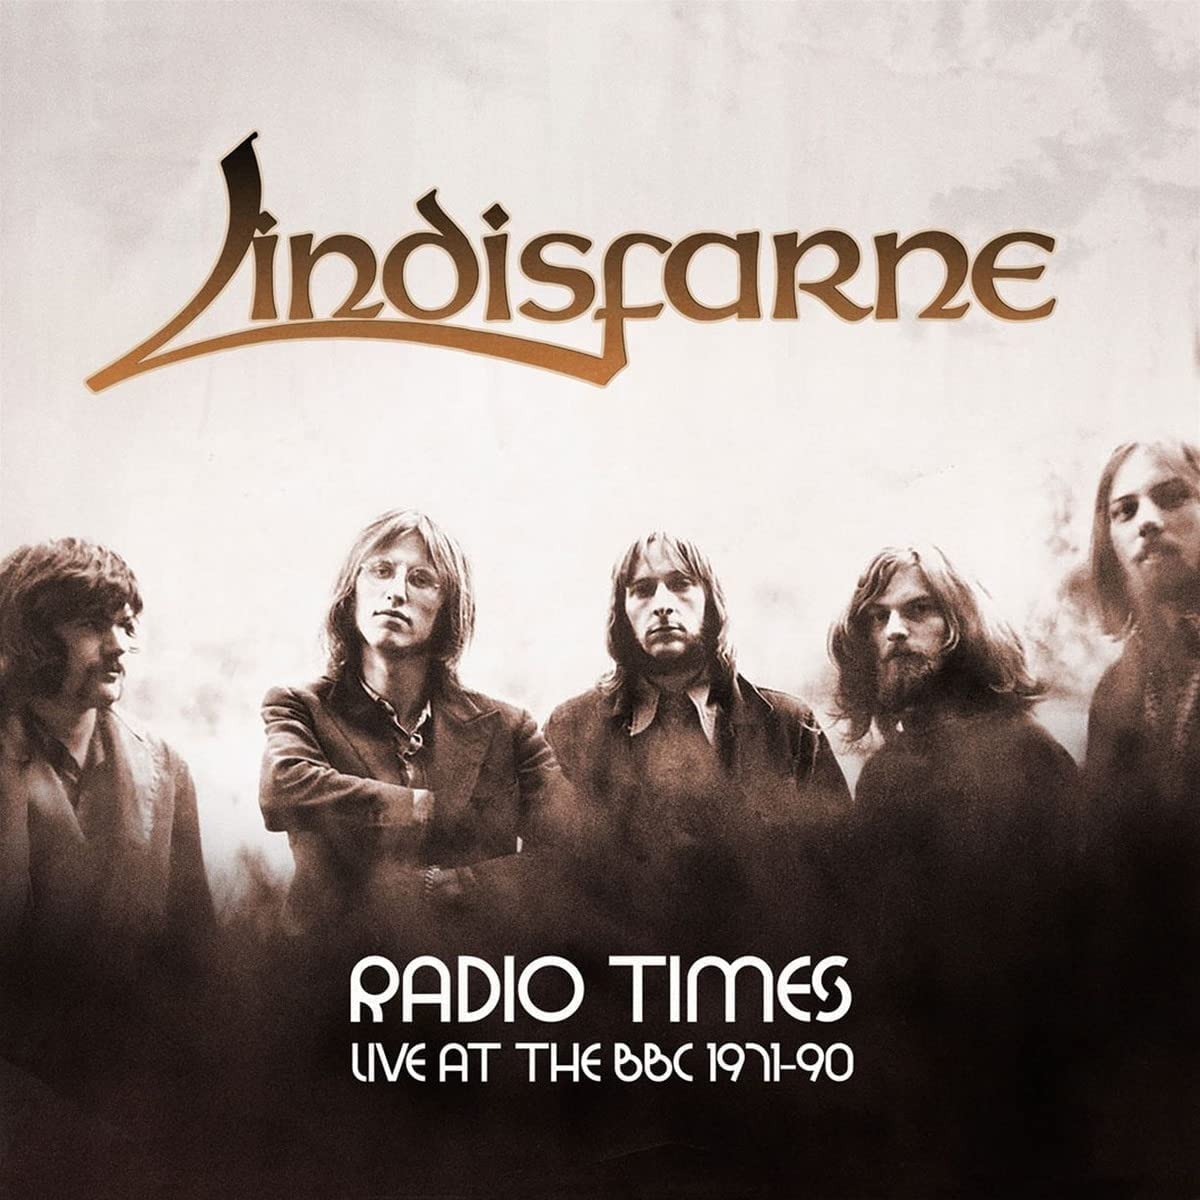 Lindisfarne_Radio_Times_Live_at_the_BBC1971-90 album front cover